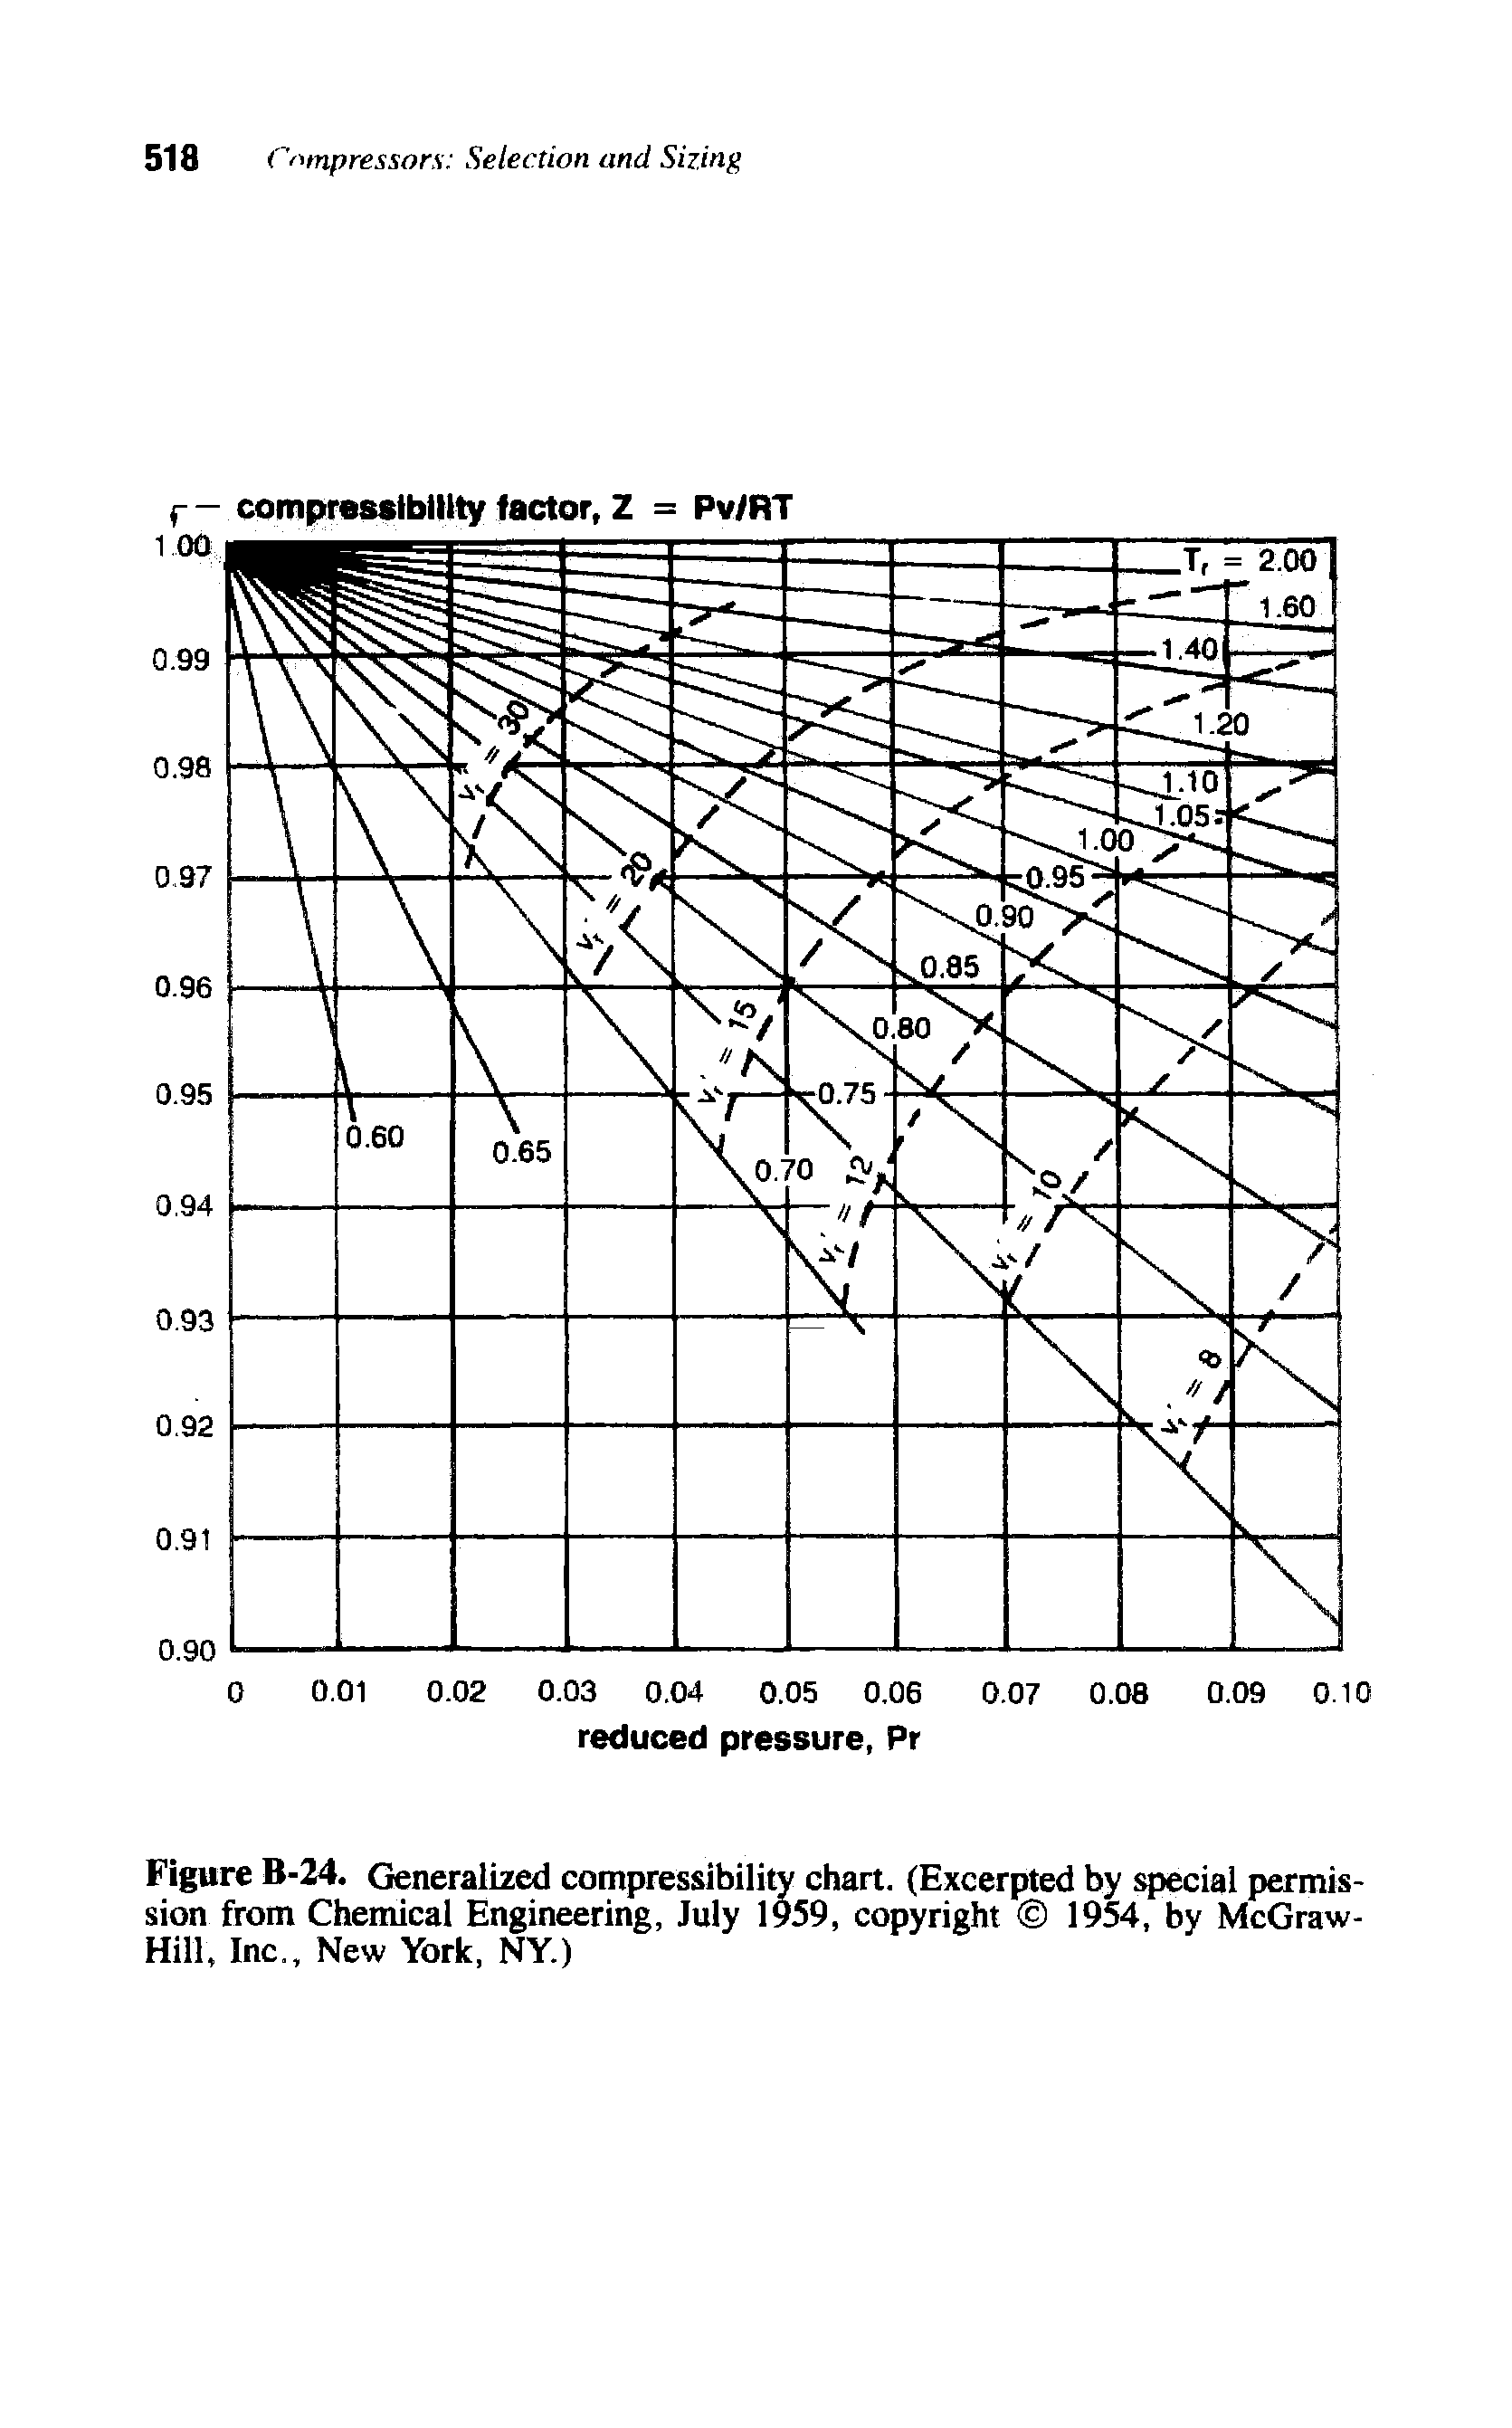 Figure B-24. Generalized compressibility chart. (Excerpted by special permission from Chemical Engineering, July 1959, copyright 1954, by McGraw-Hill, Inc., New York, NY.)...